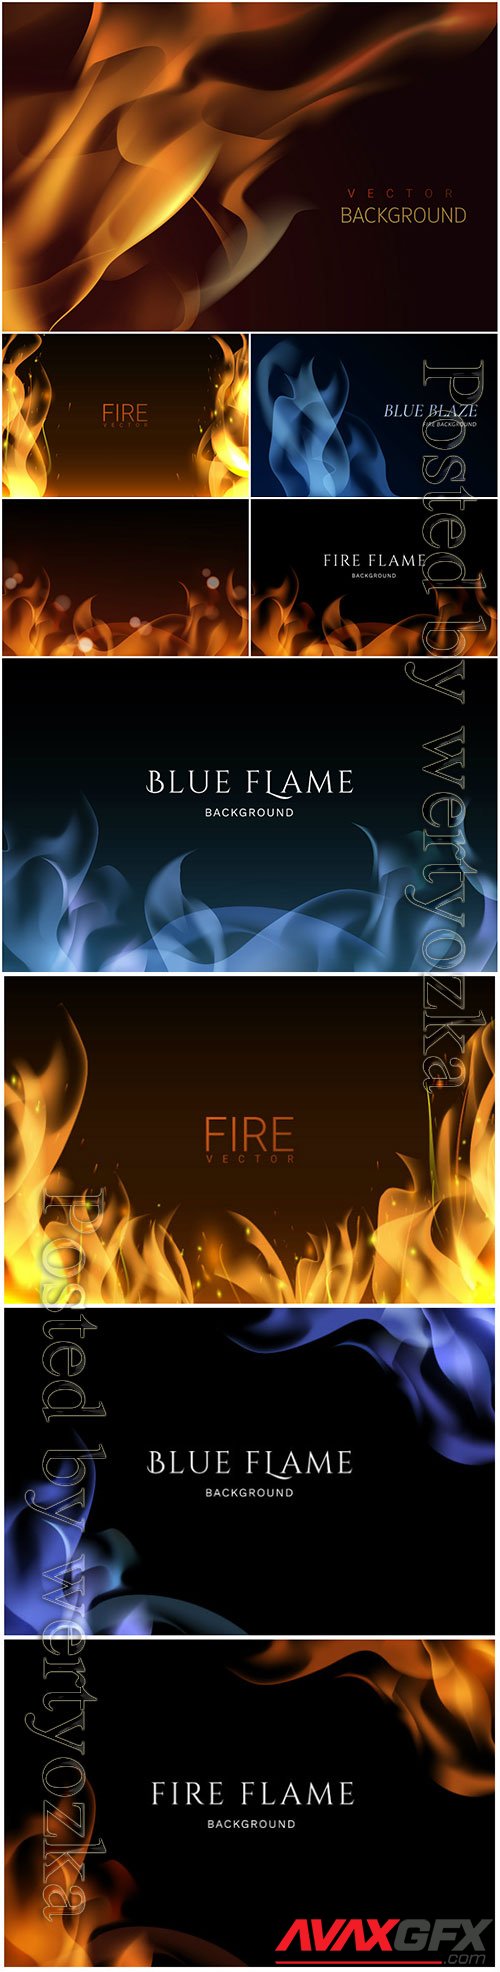 Burning flame vector background